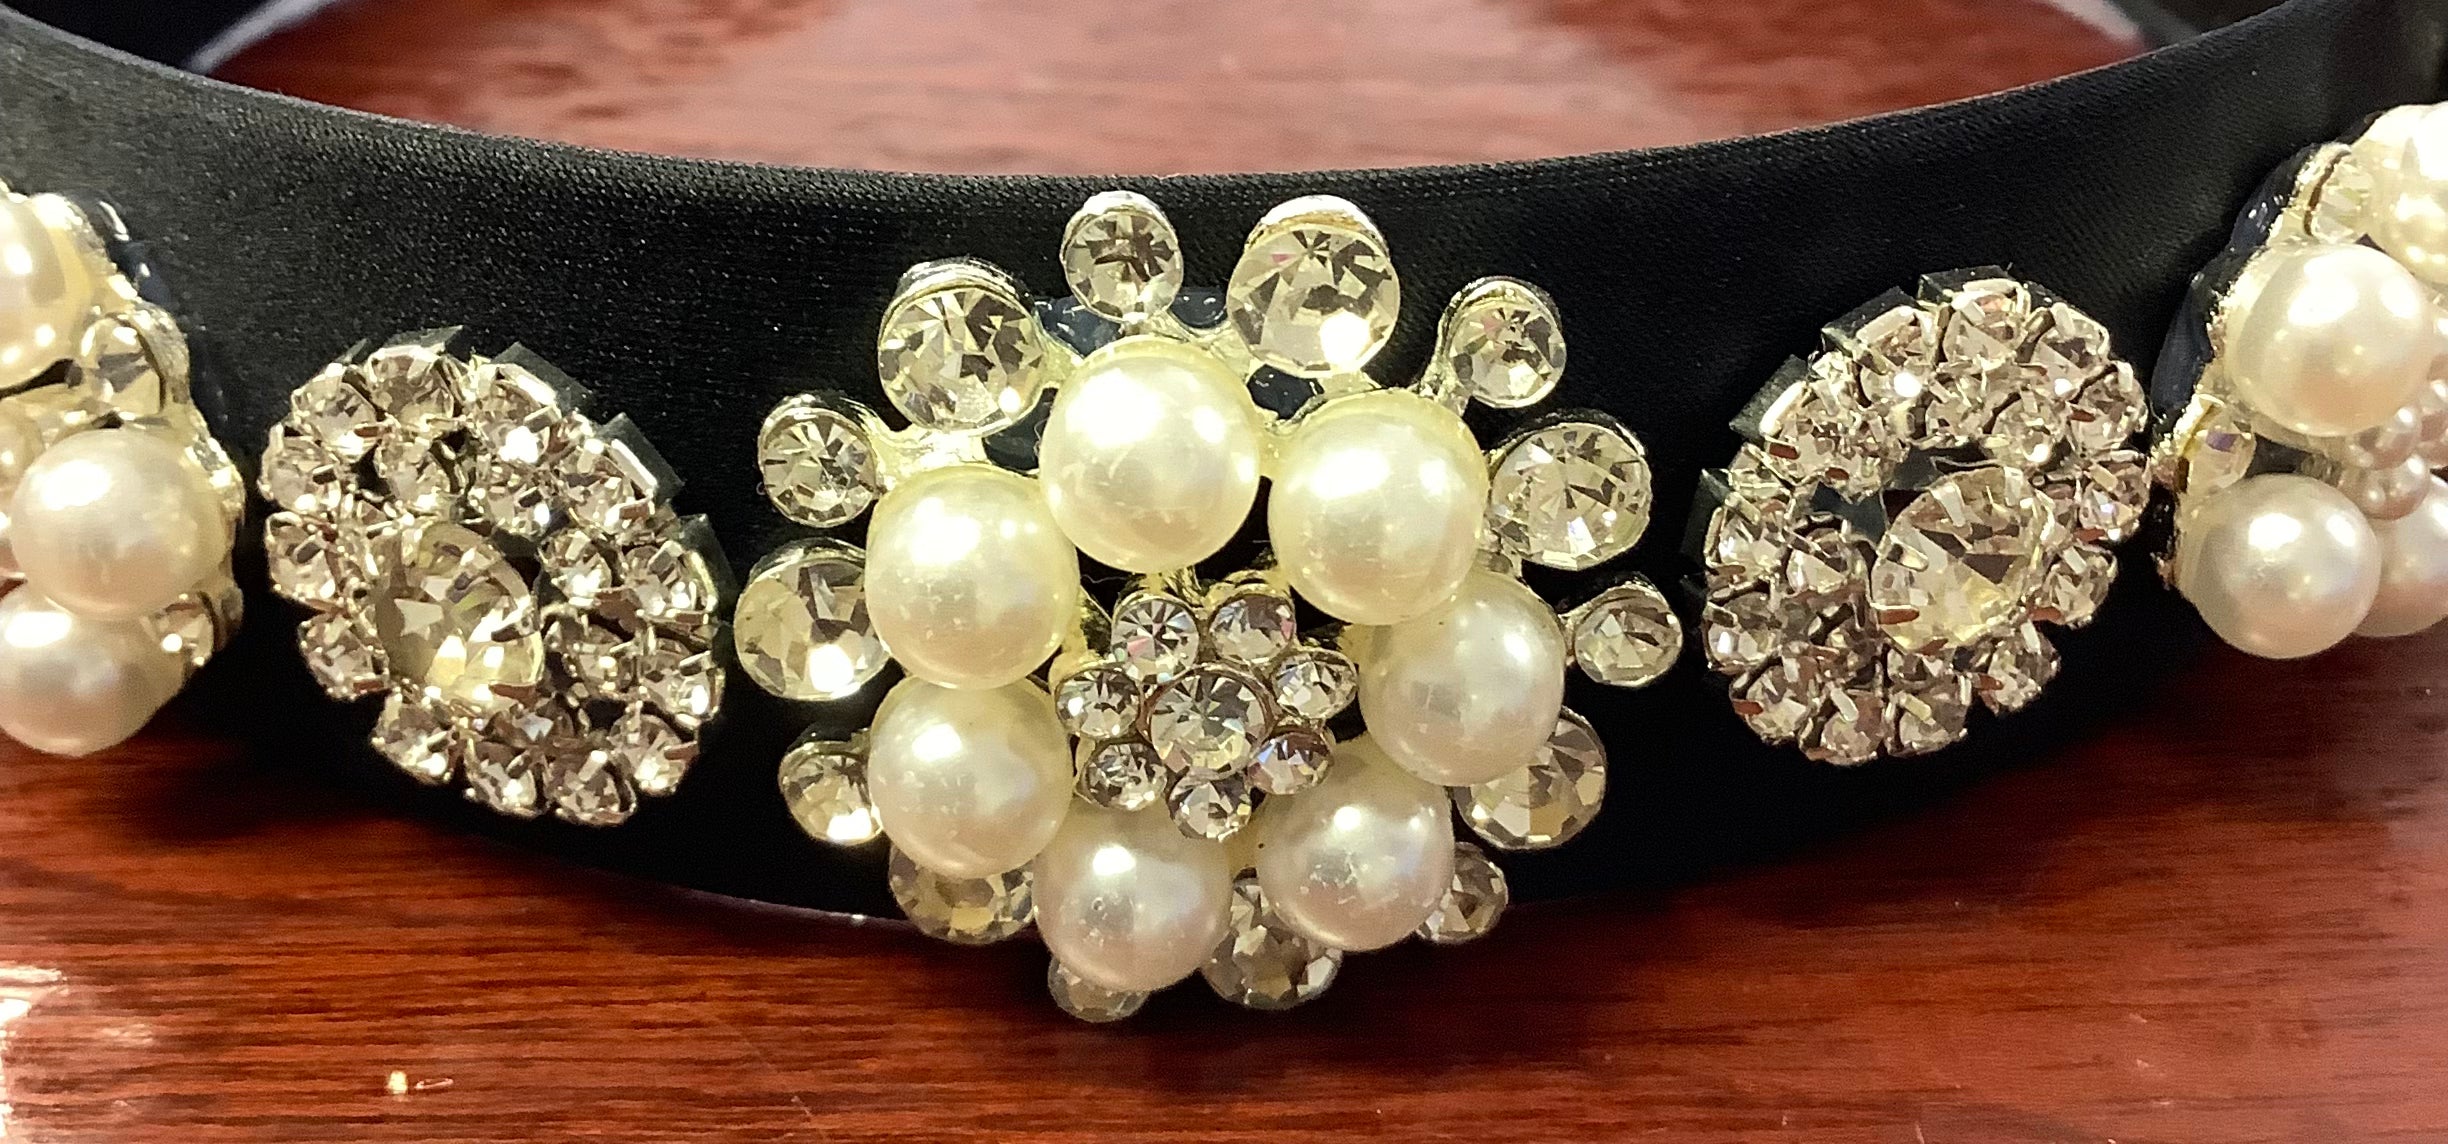 Black Base Beaded Hairband | Orchid Boutique | Orchid Boutique